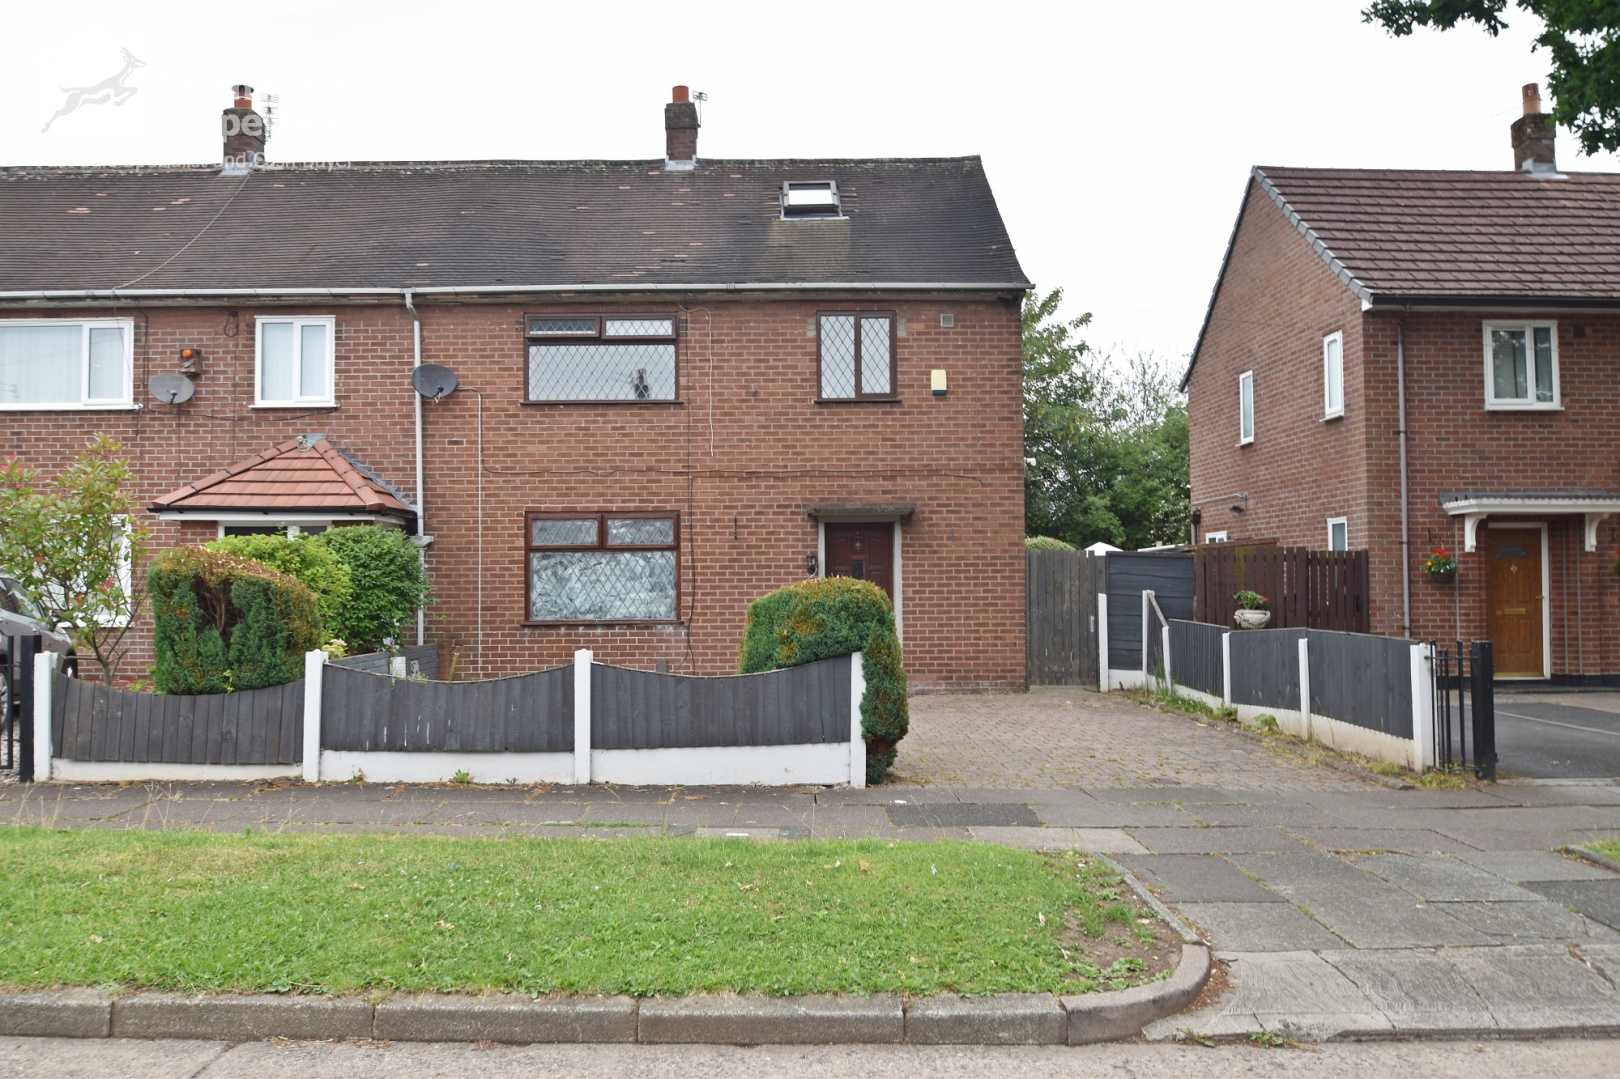 House in Wythenshawe, Manchester 11922042